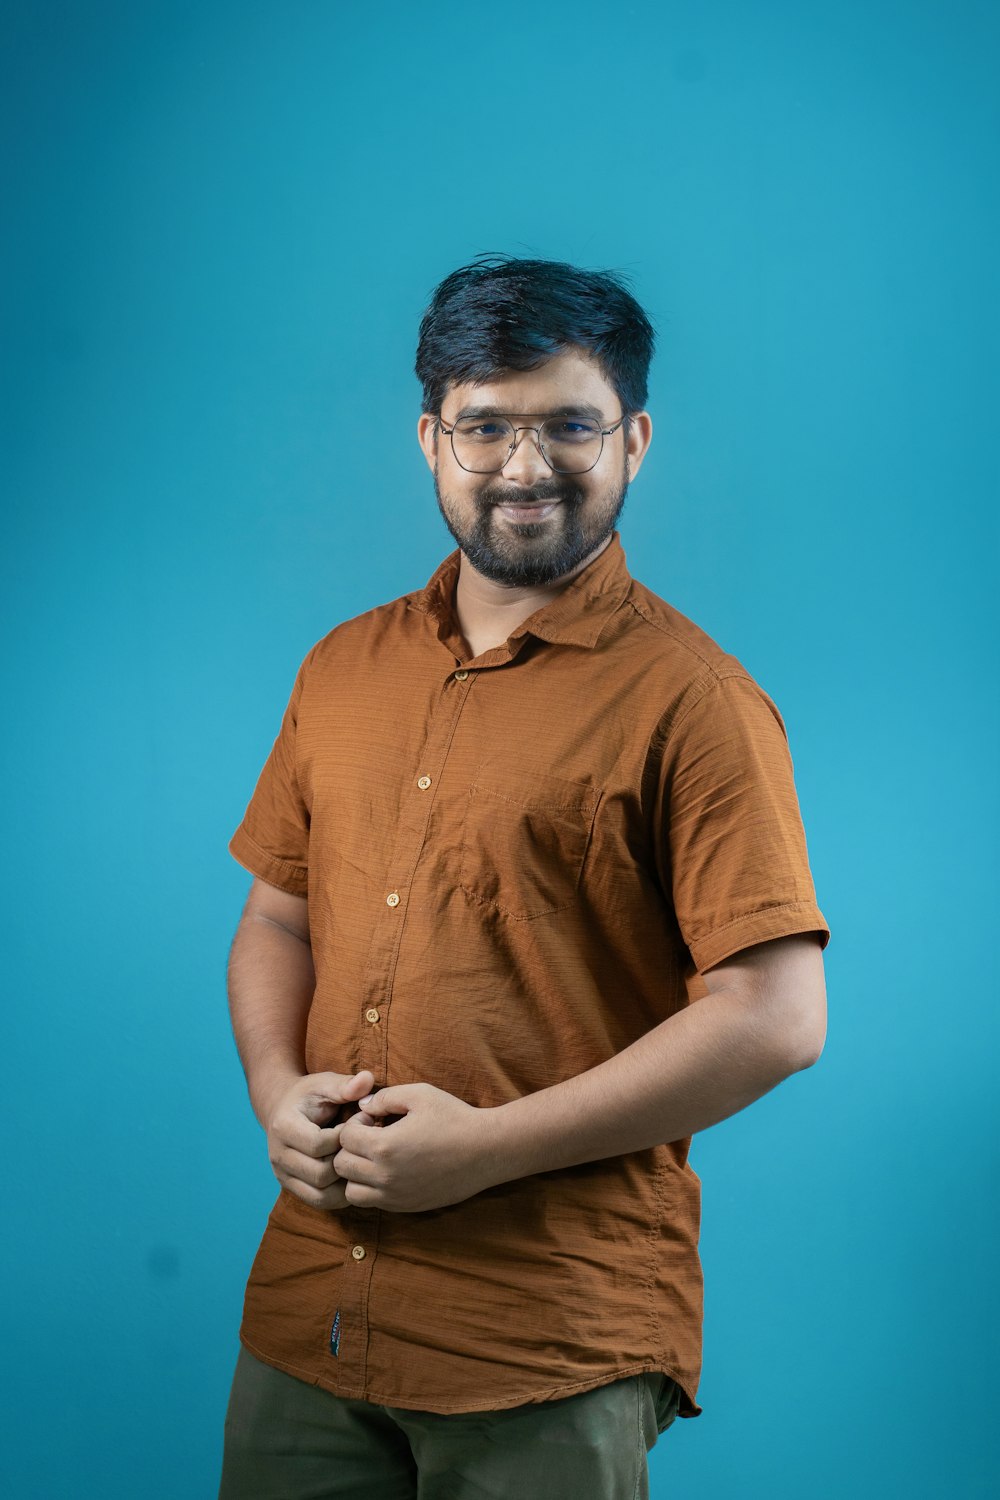 a man with glasses standing in front of a blue background